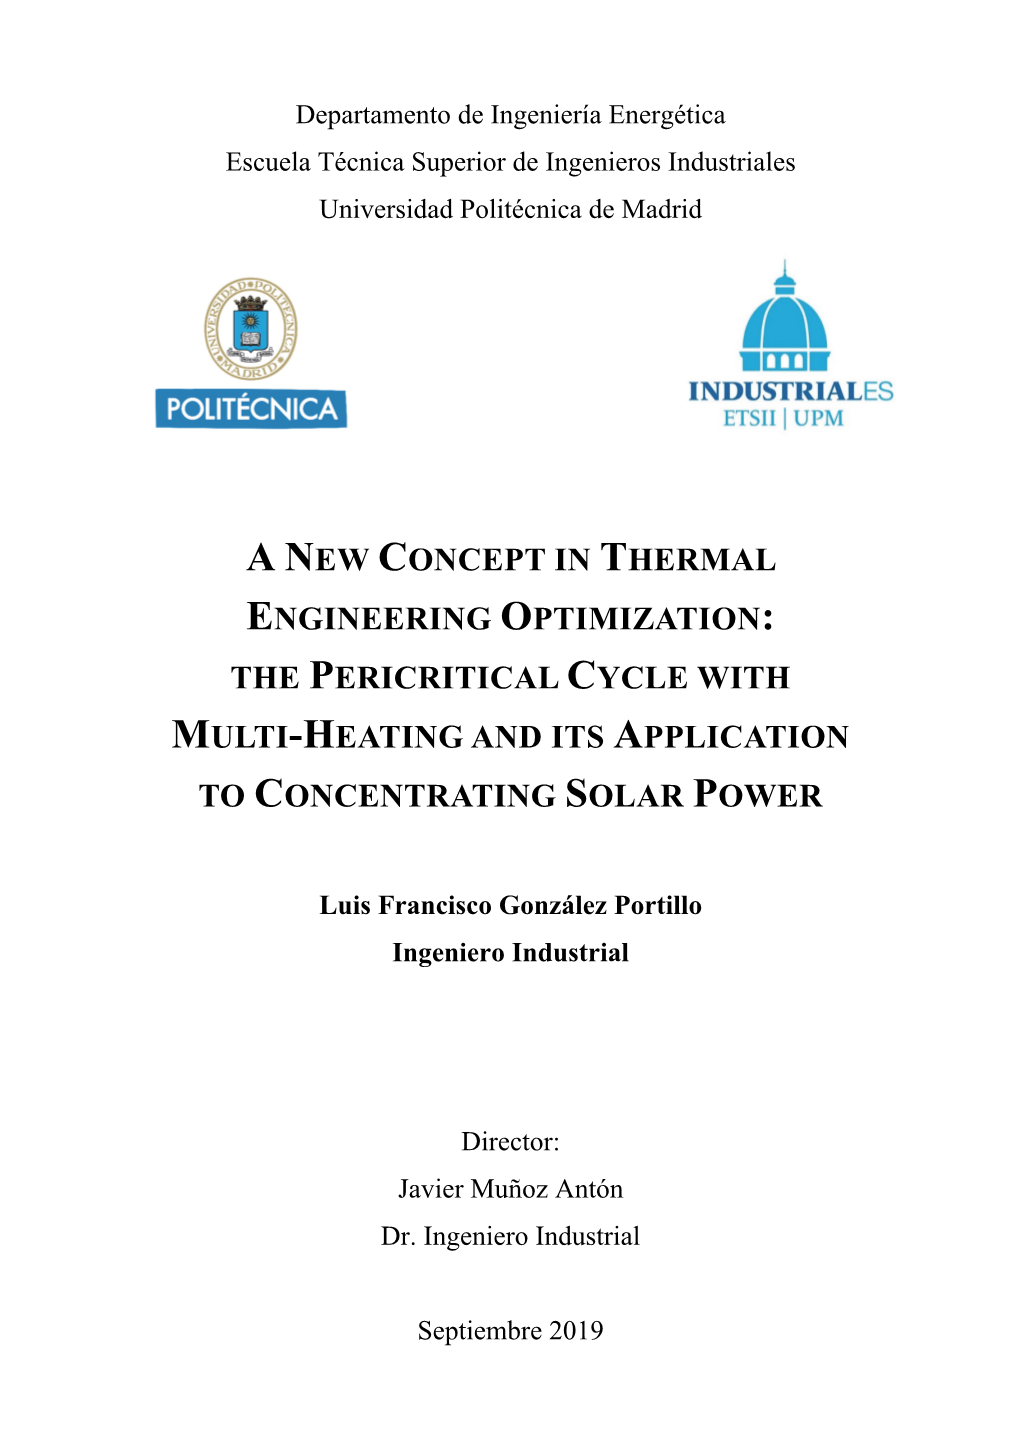 A New Concept in Thermal Engineering Optimization: the Pericritical Cycle with Multi-Heating and Its Application to Concentrating Solar Power